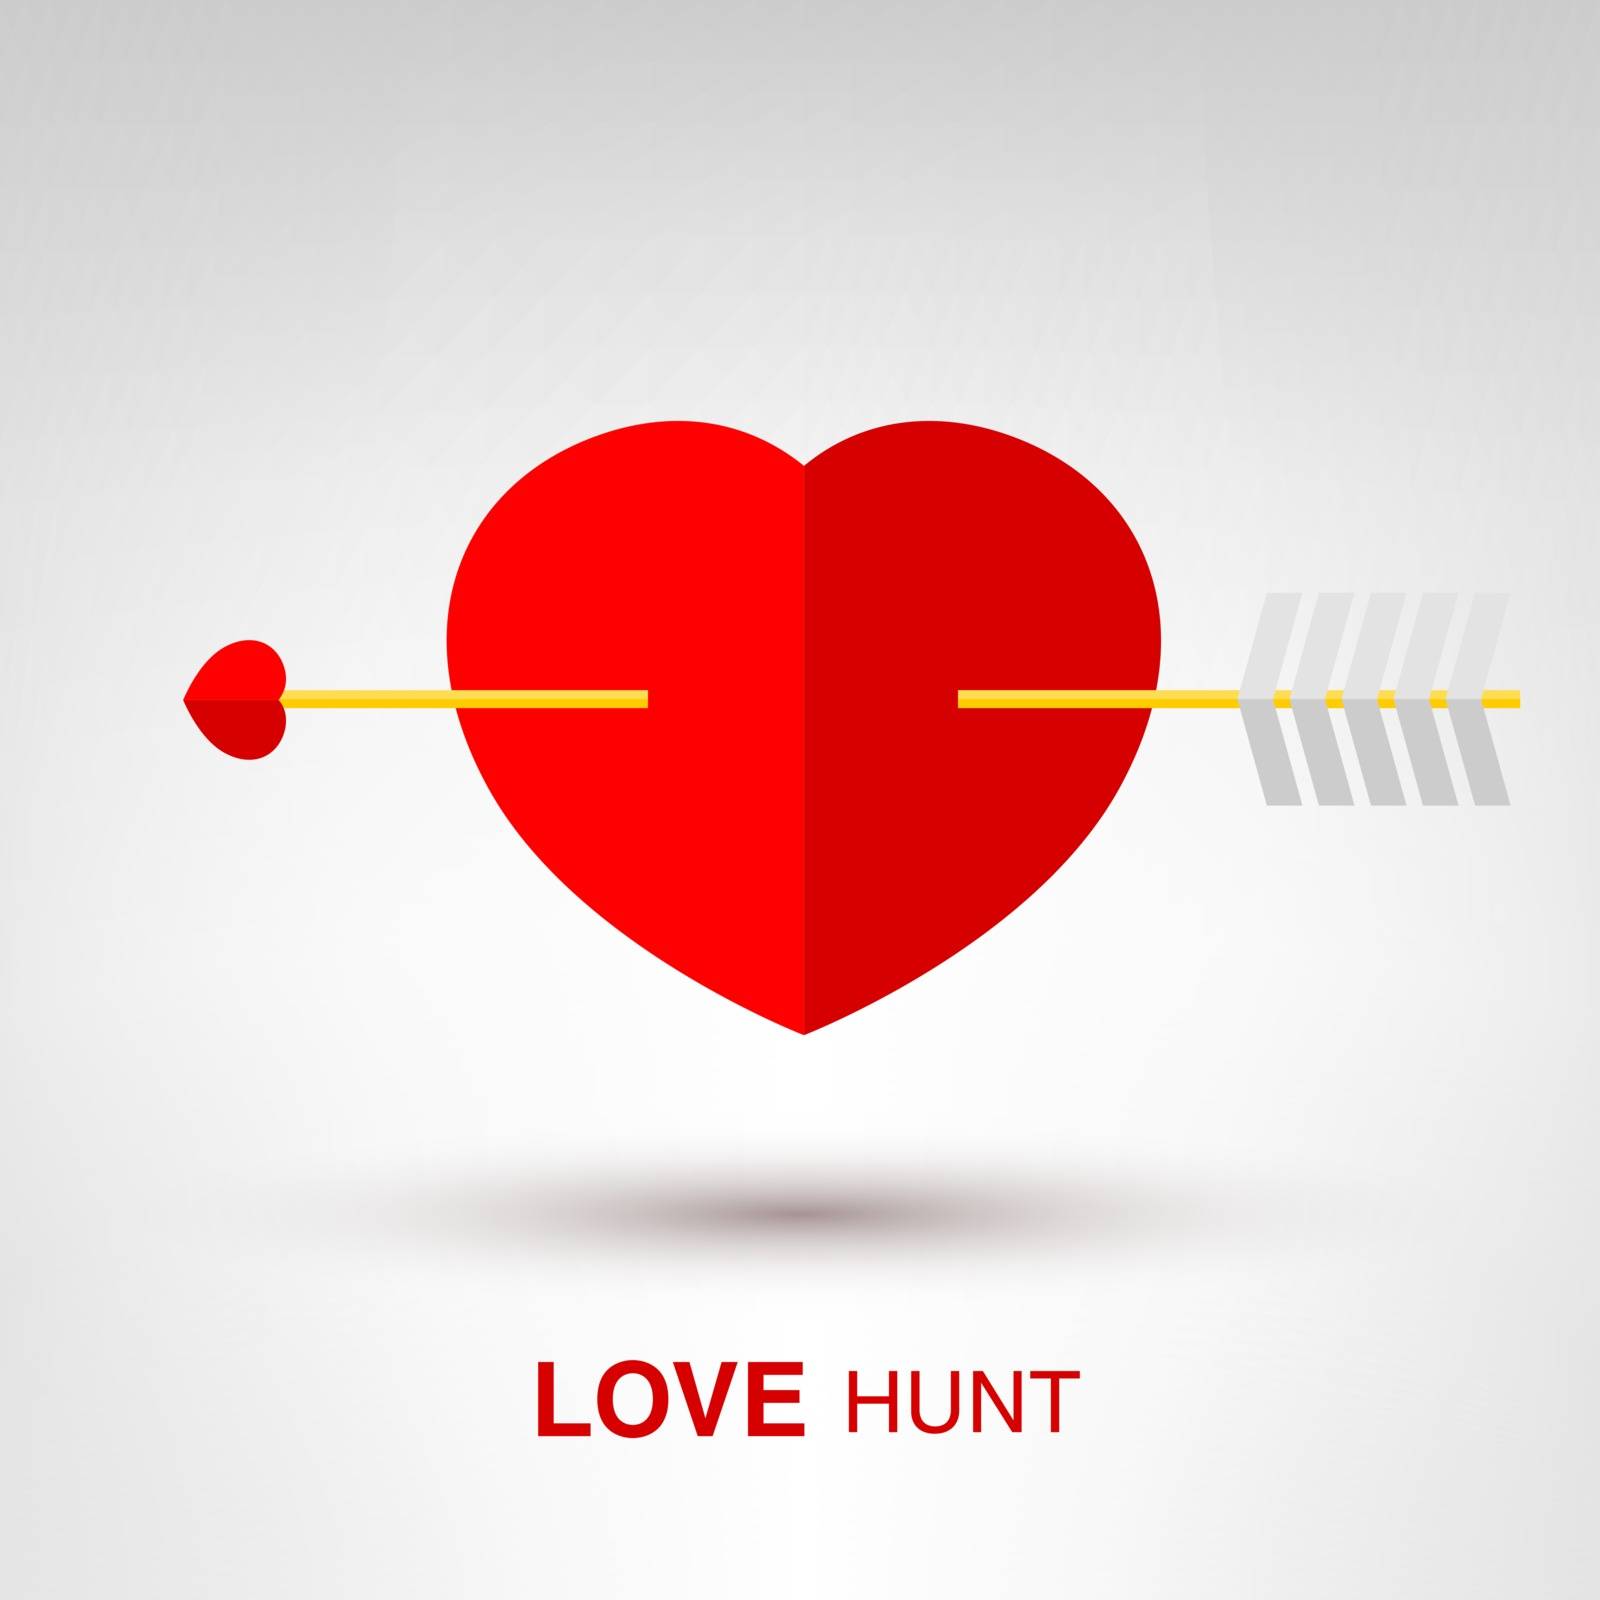 Love Hunt - creative Valentines Day heart with arrow concept vector illustration